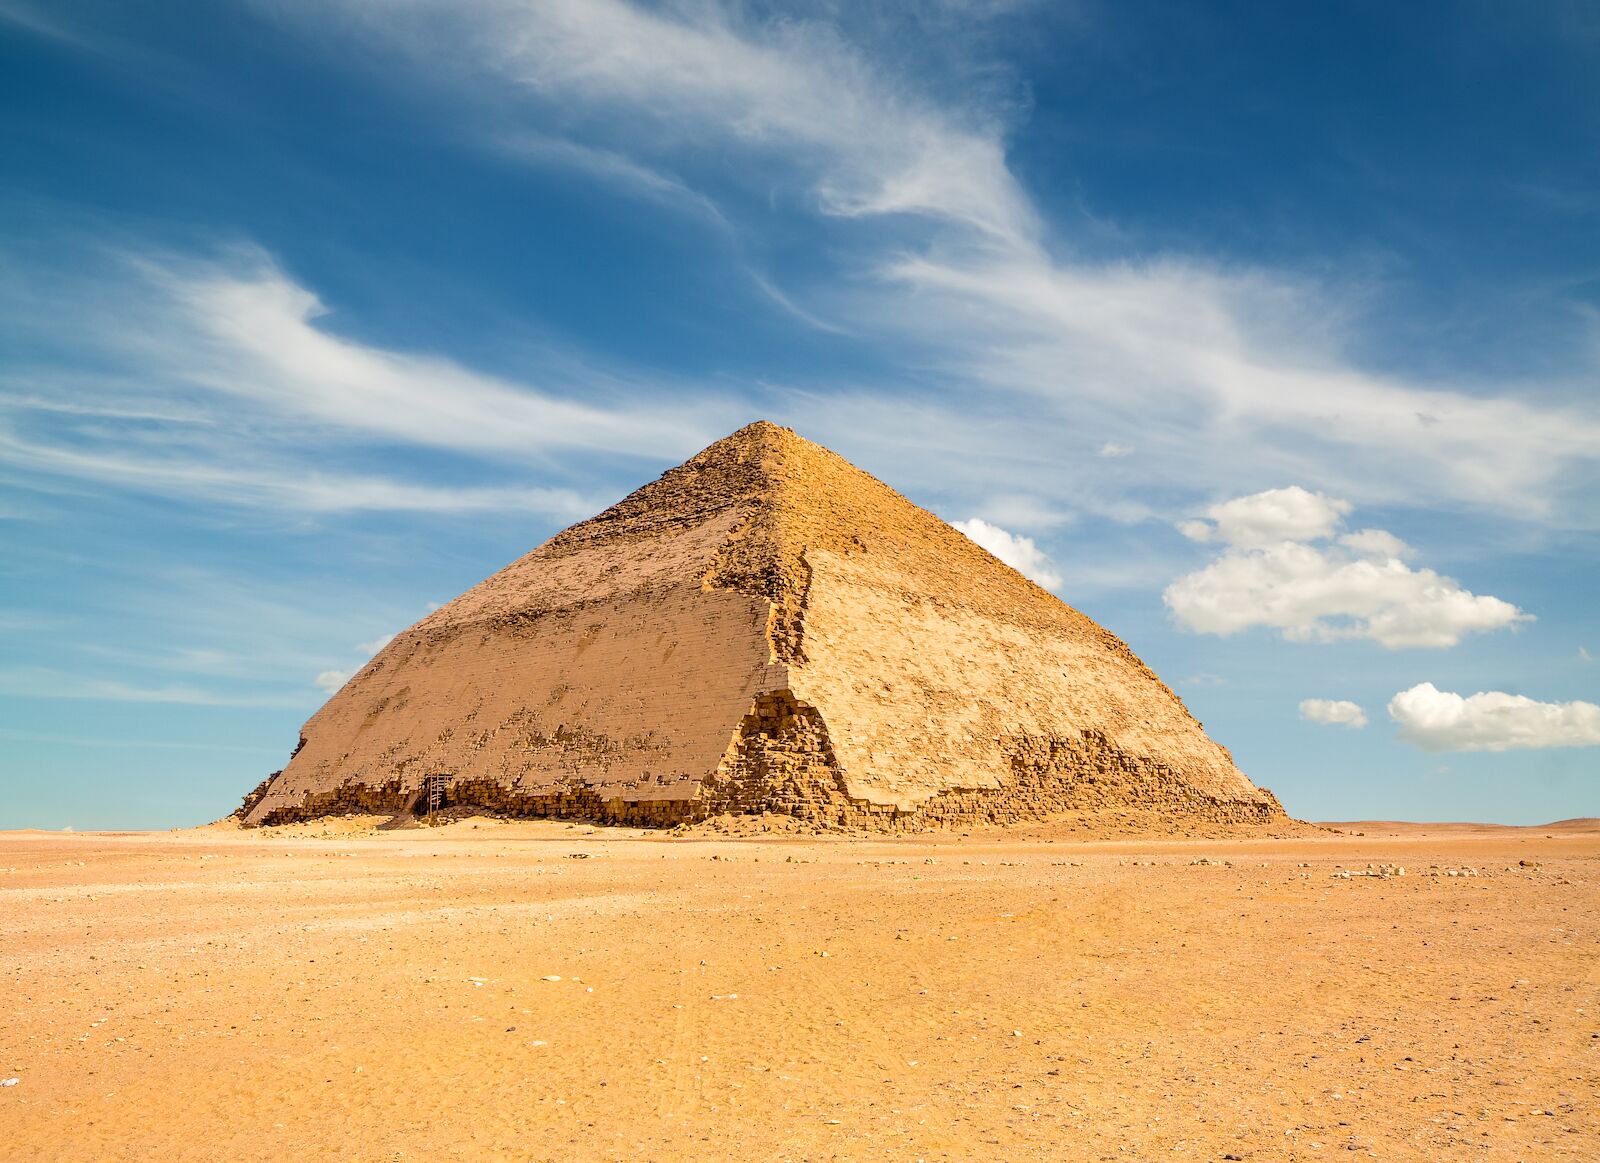 The Bent Pyramid. What's inside this pyramid?